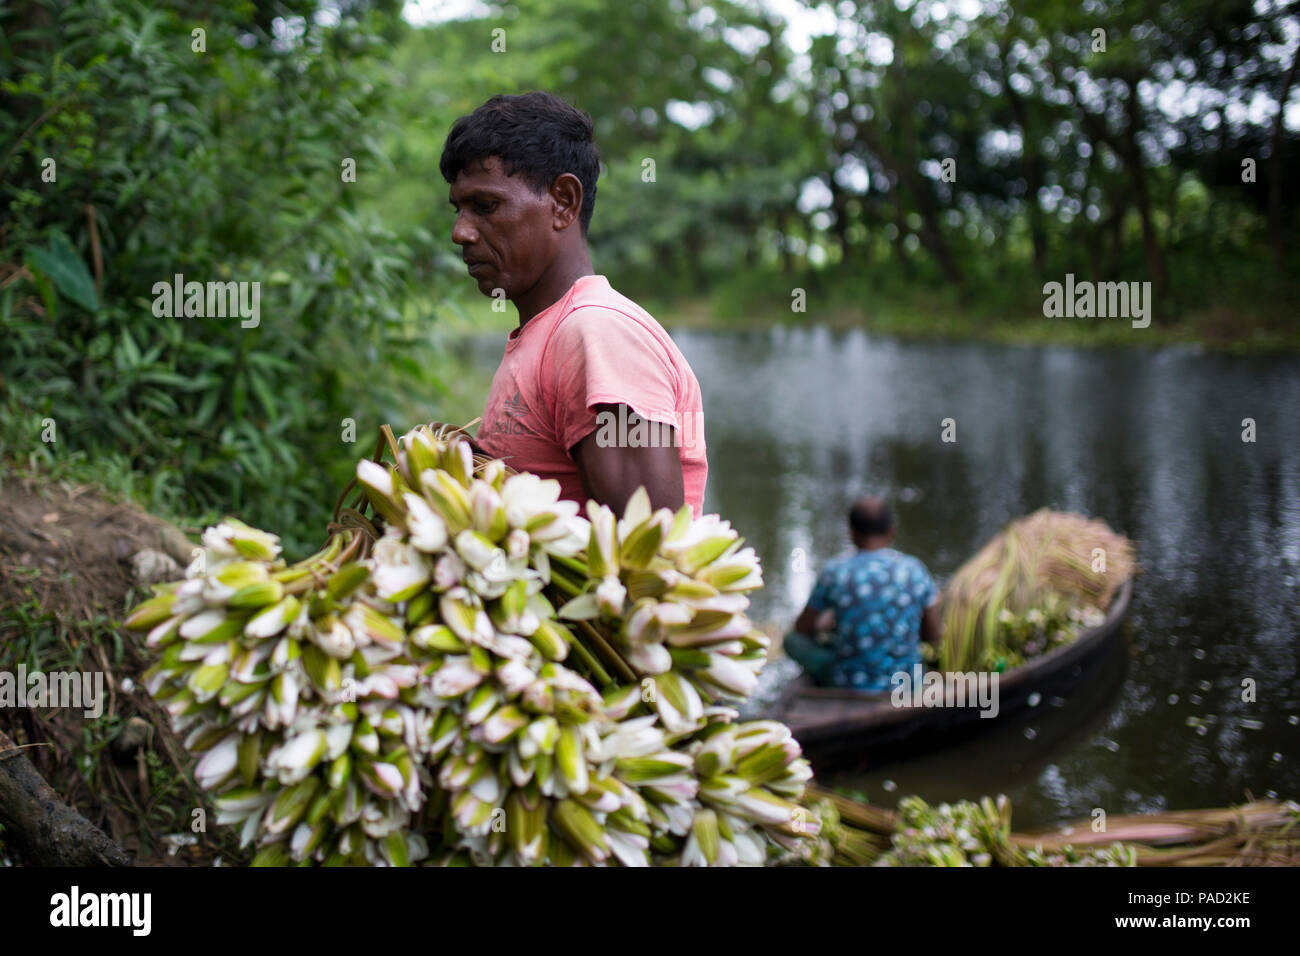 Dhaka, Bangladesh. 21 July 2018. Bangladeshi people process water lily to sell them in market near in Dhaka , Bangladesh on July 21, 2018.  Almost three-quarters of the population live in rural areas. Families in rural Bangladesh rely primarily on agriculture,poultry and fishing for their daily income..At the Sustainable Development Summit on 25 September, 2015, UN Member States will adopt the 2030 Agenda for Sustainable Development, which includes a set of 17 Sustainable Development Goals (SDGs) to end poverty, fight inequality and injustice, and tackle climate change by 2030..Prime Minister  Stock Photo